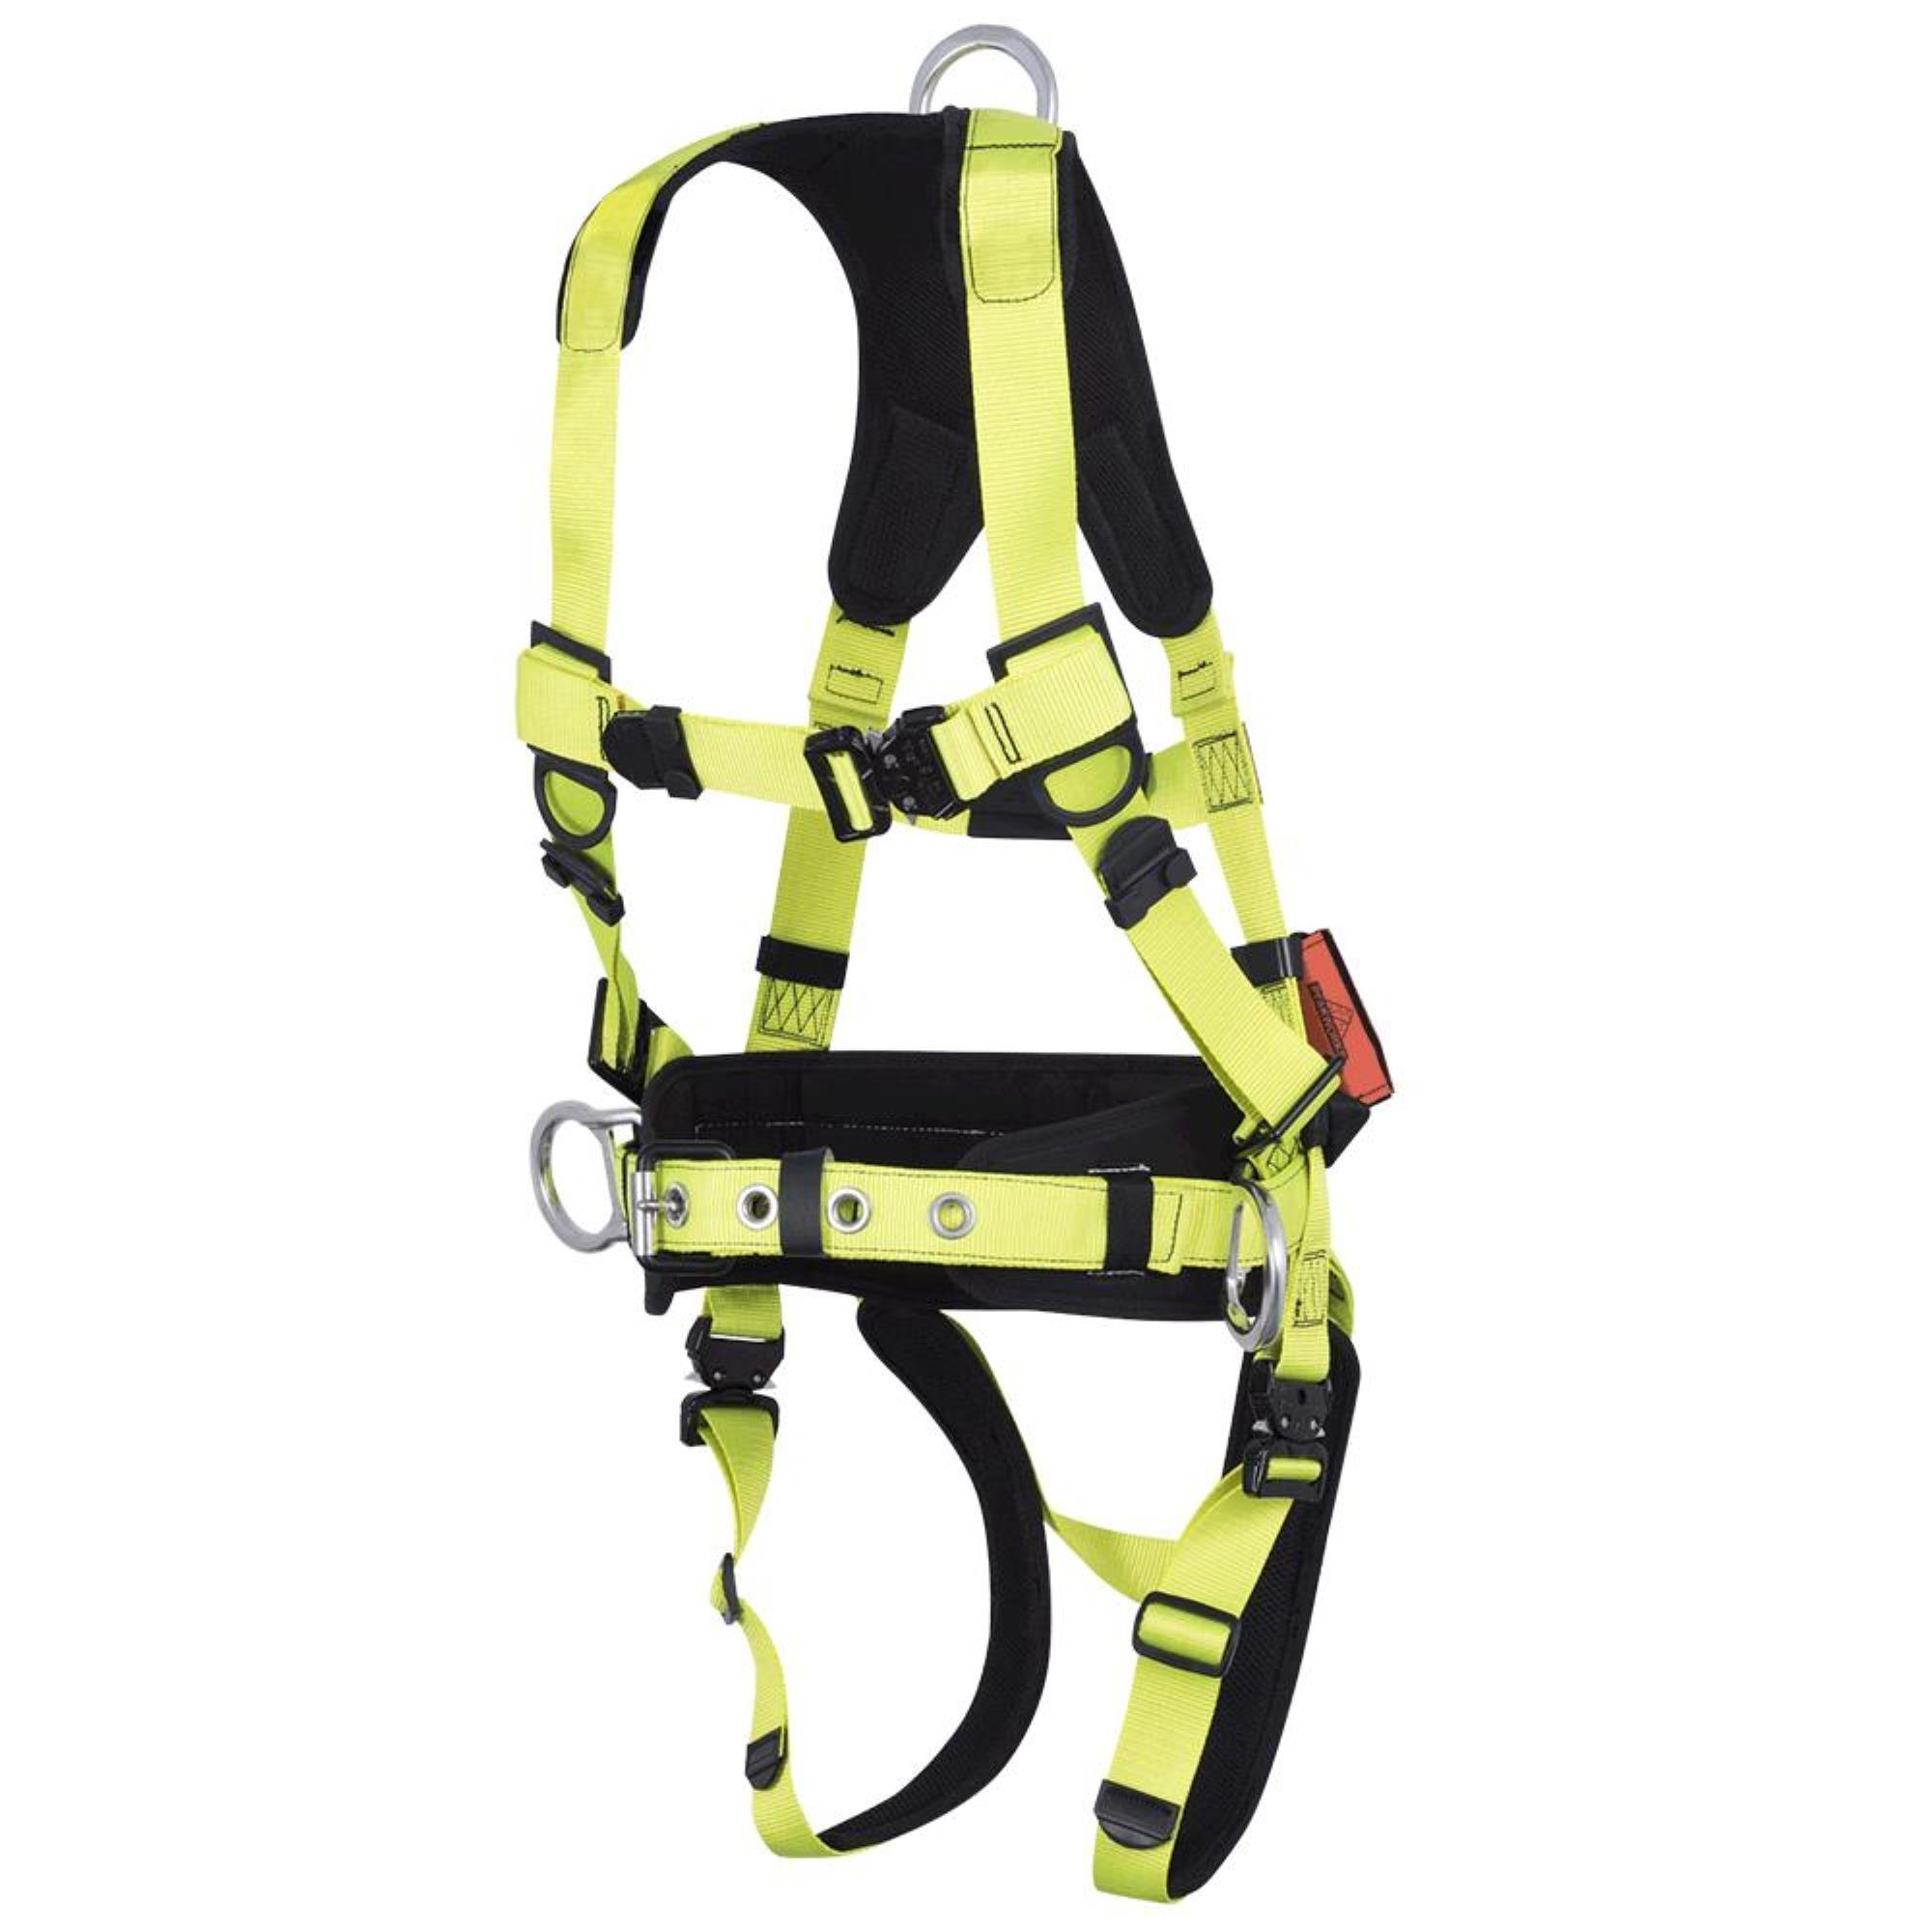 Peak Works, PeakPro Plus Harness 3D Class AP, S, Trauma Strap, Weight Capacity 400 lb, Harness Size S, Model V8005111